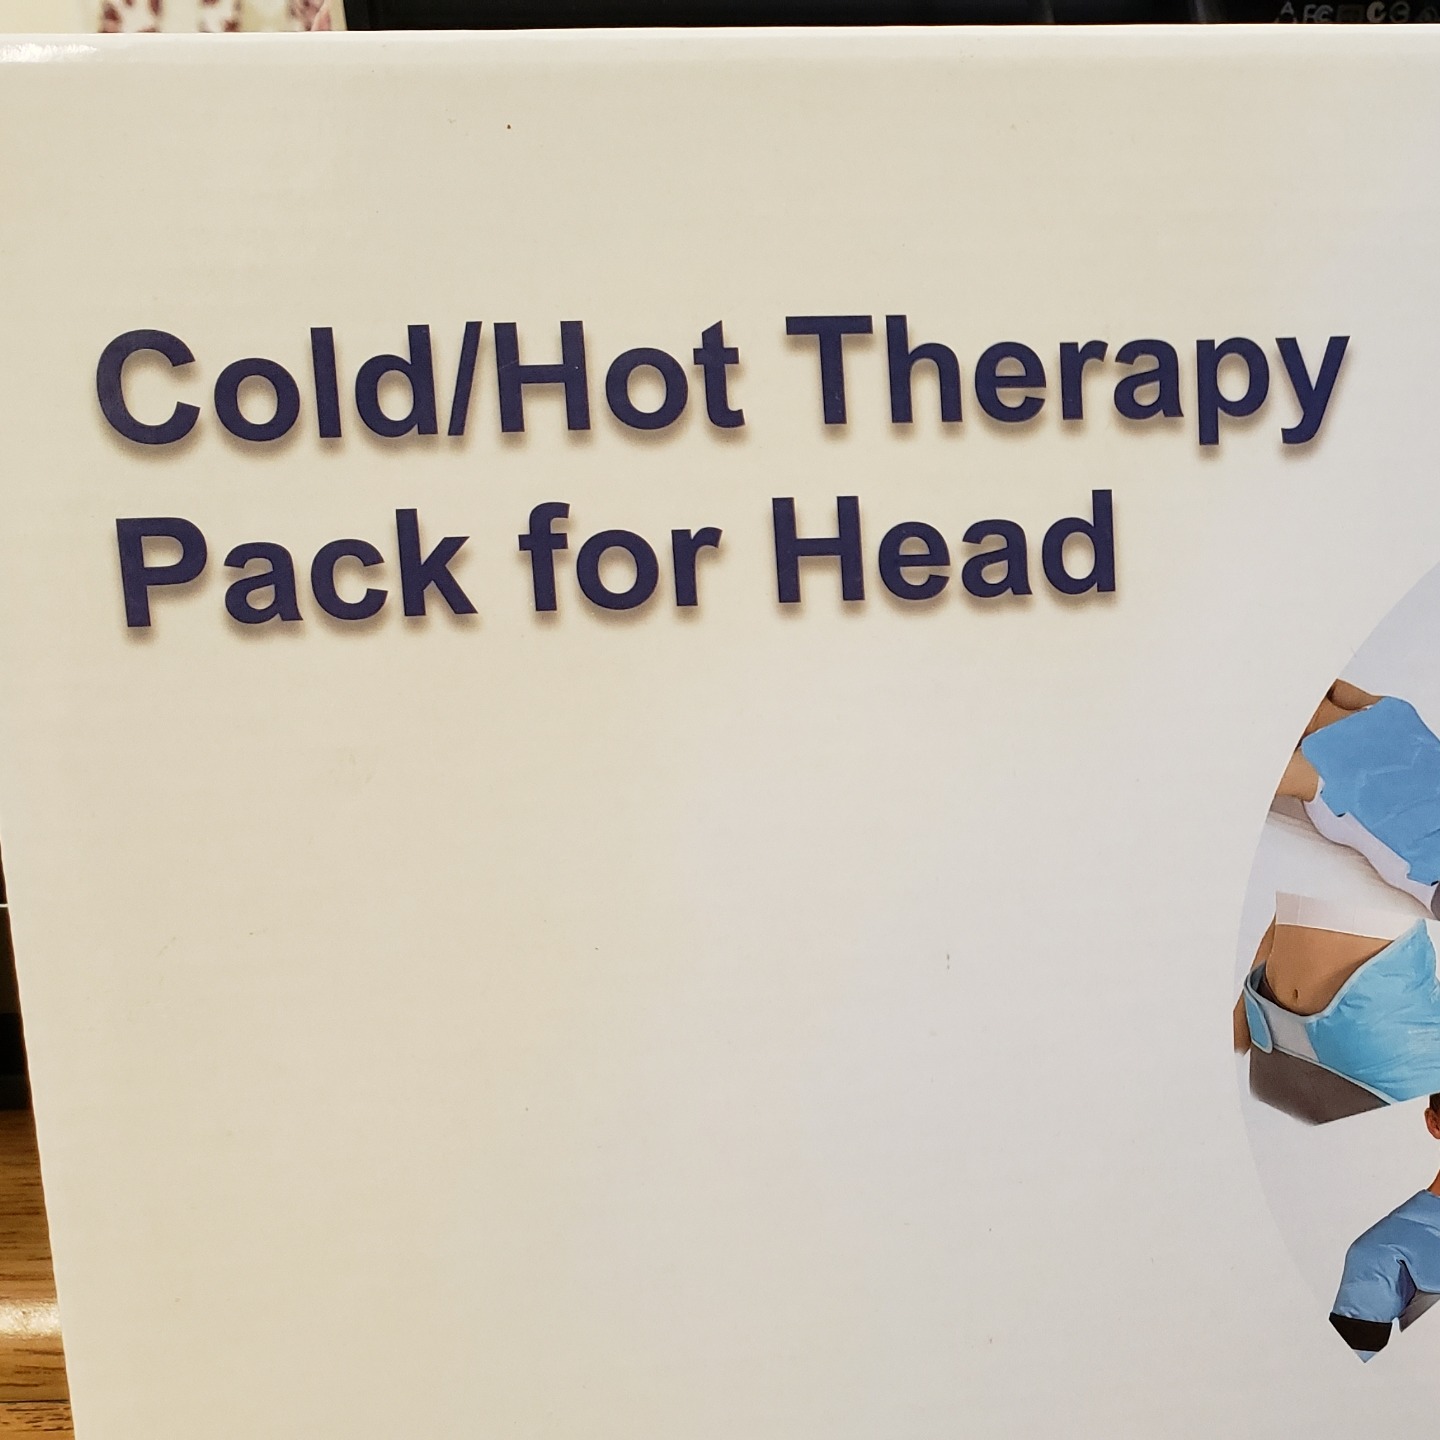 Cold/Hot Therapy Pack